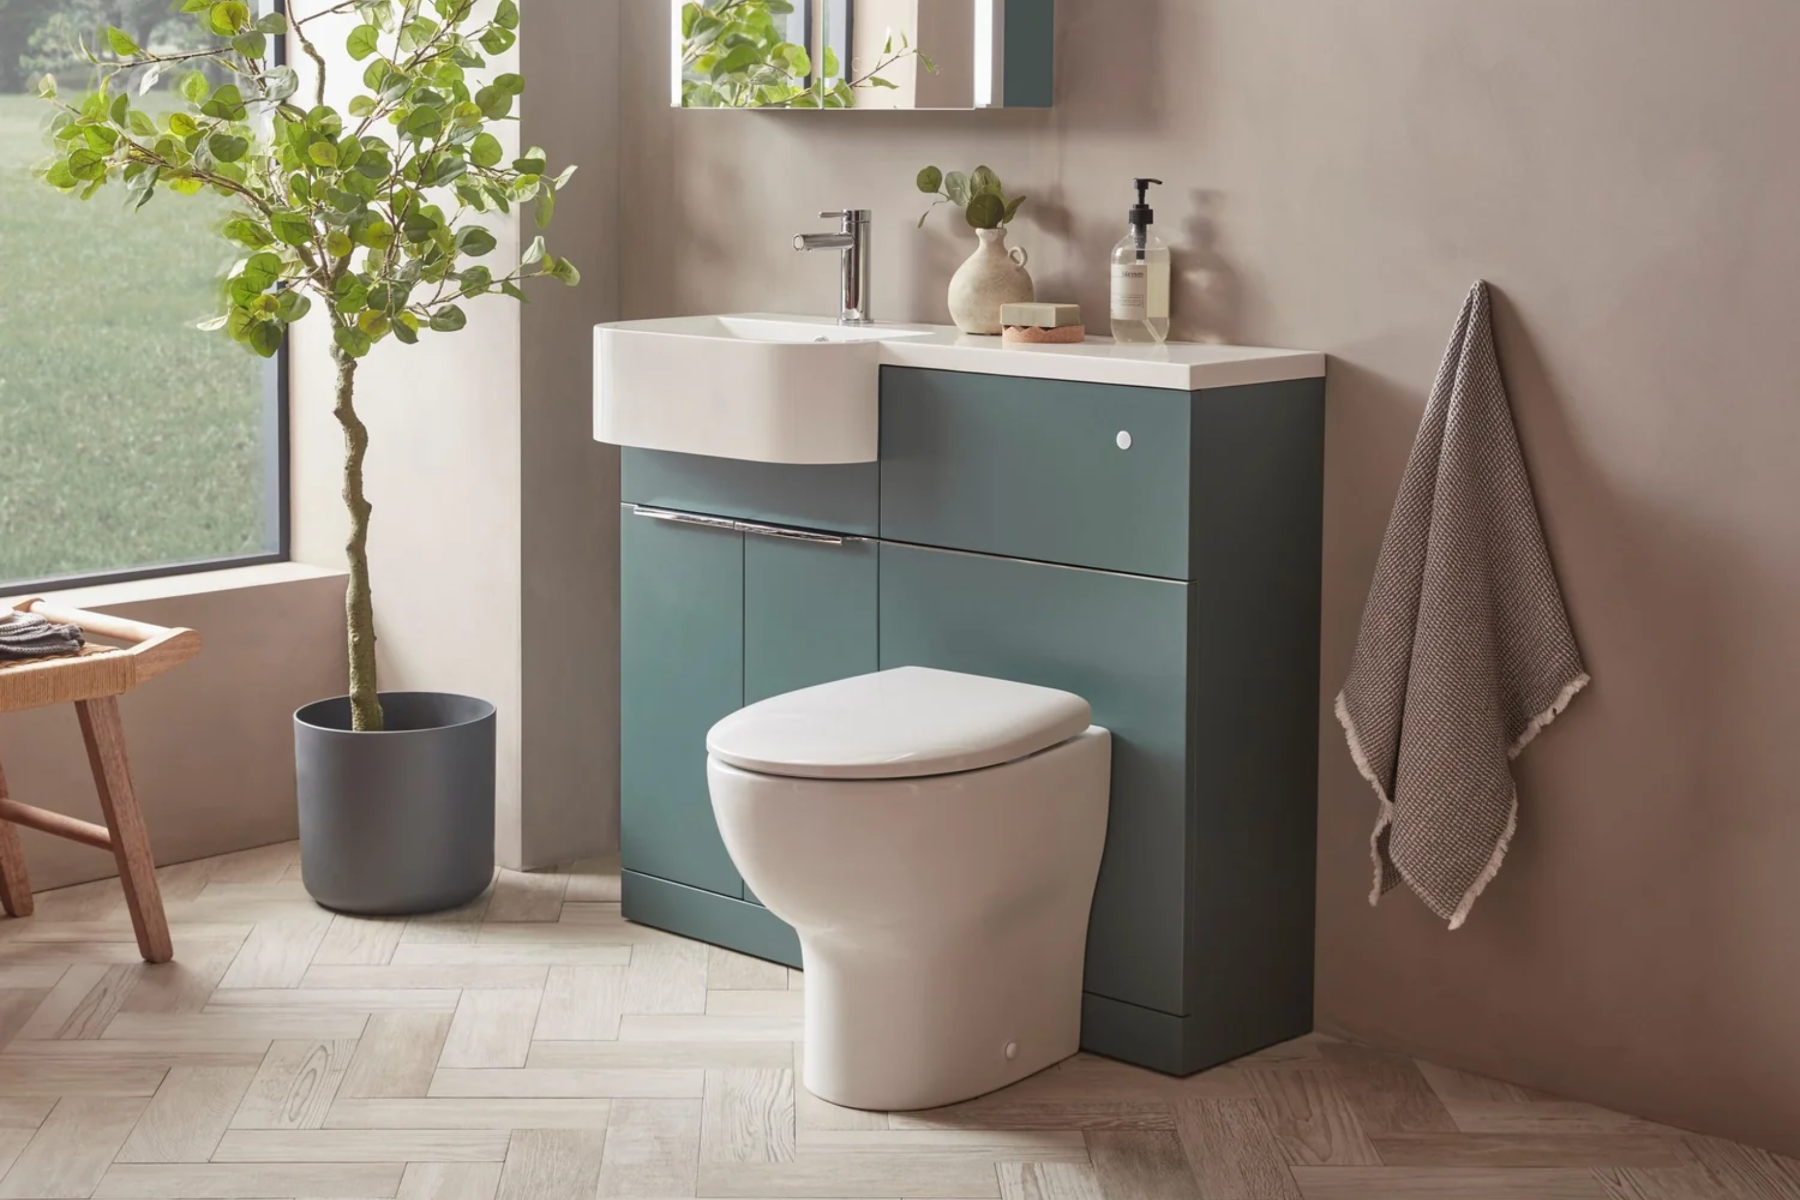 Stylish Green Combination Unit In Bathroom Space